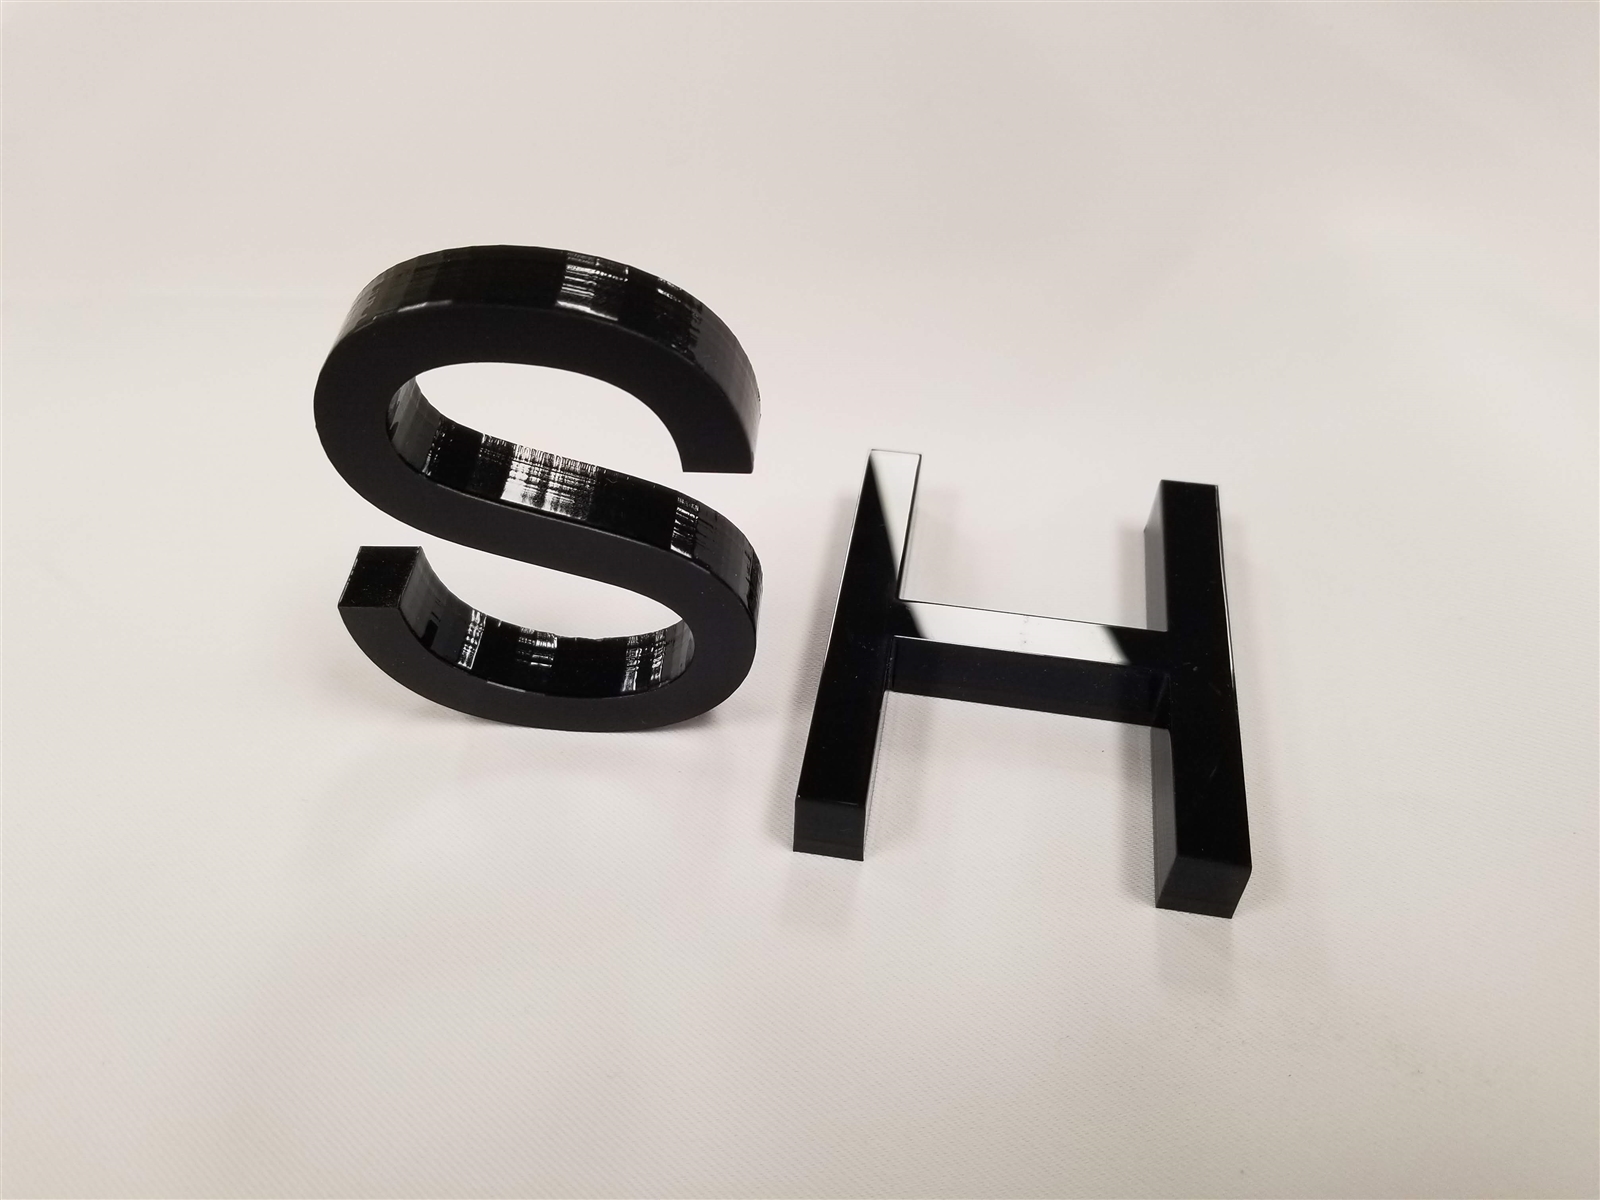 White Acrylic Laser Cut Letters - 1/8 (3mm) Thick with Tape Backing